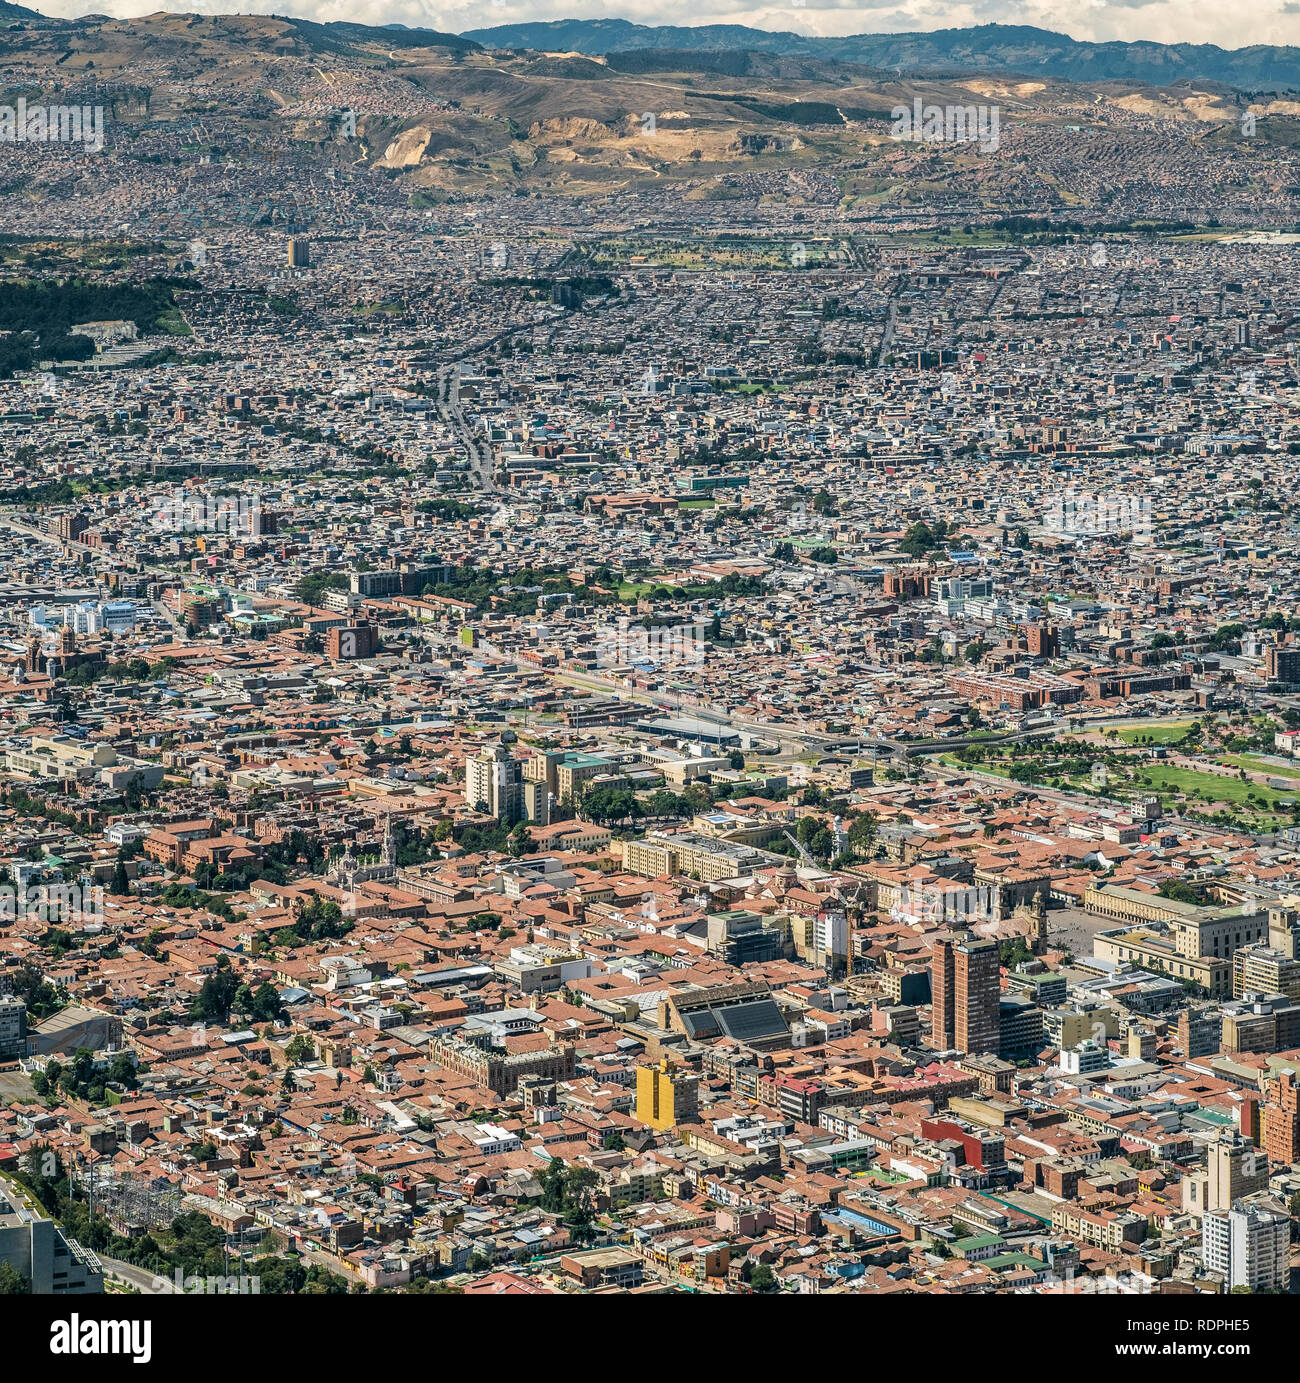 Bogotá, Colombia. Candelaria district viewed from above Stock Photo